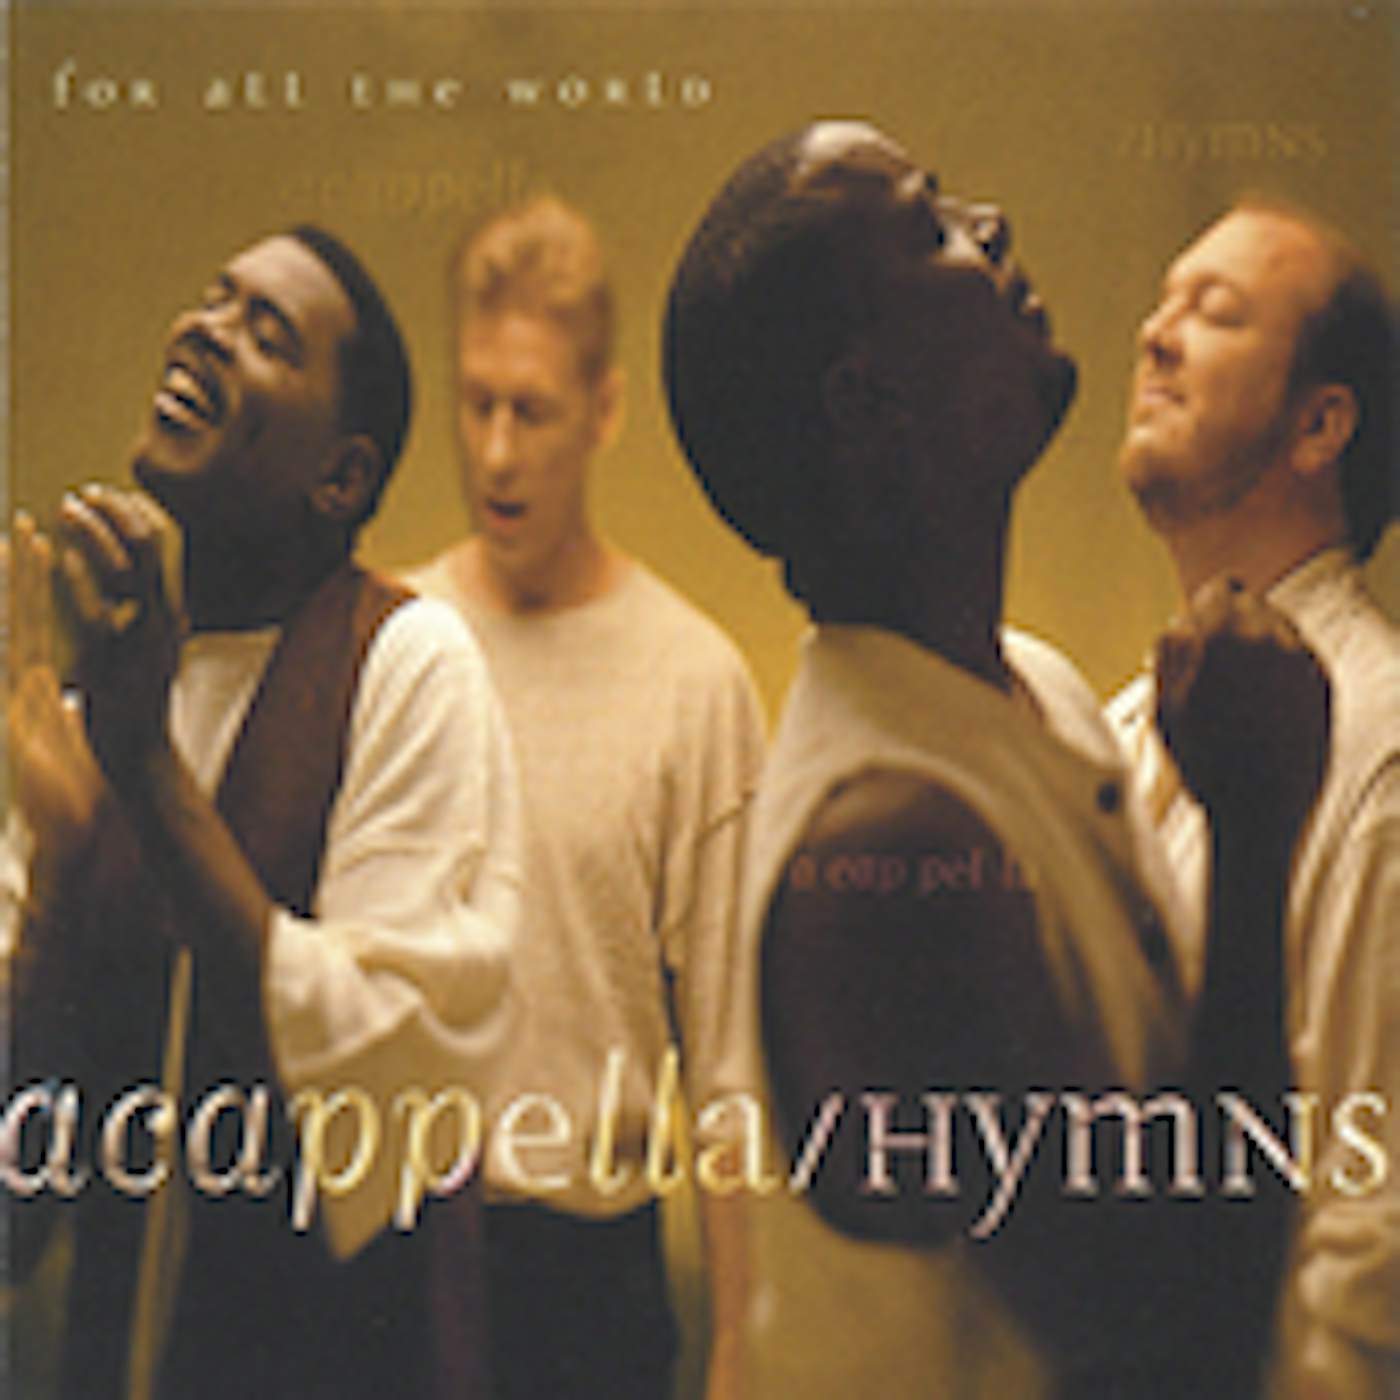 Acappella HYMNS FOR ALL THE WORLD CD